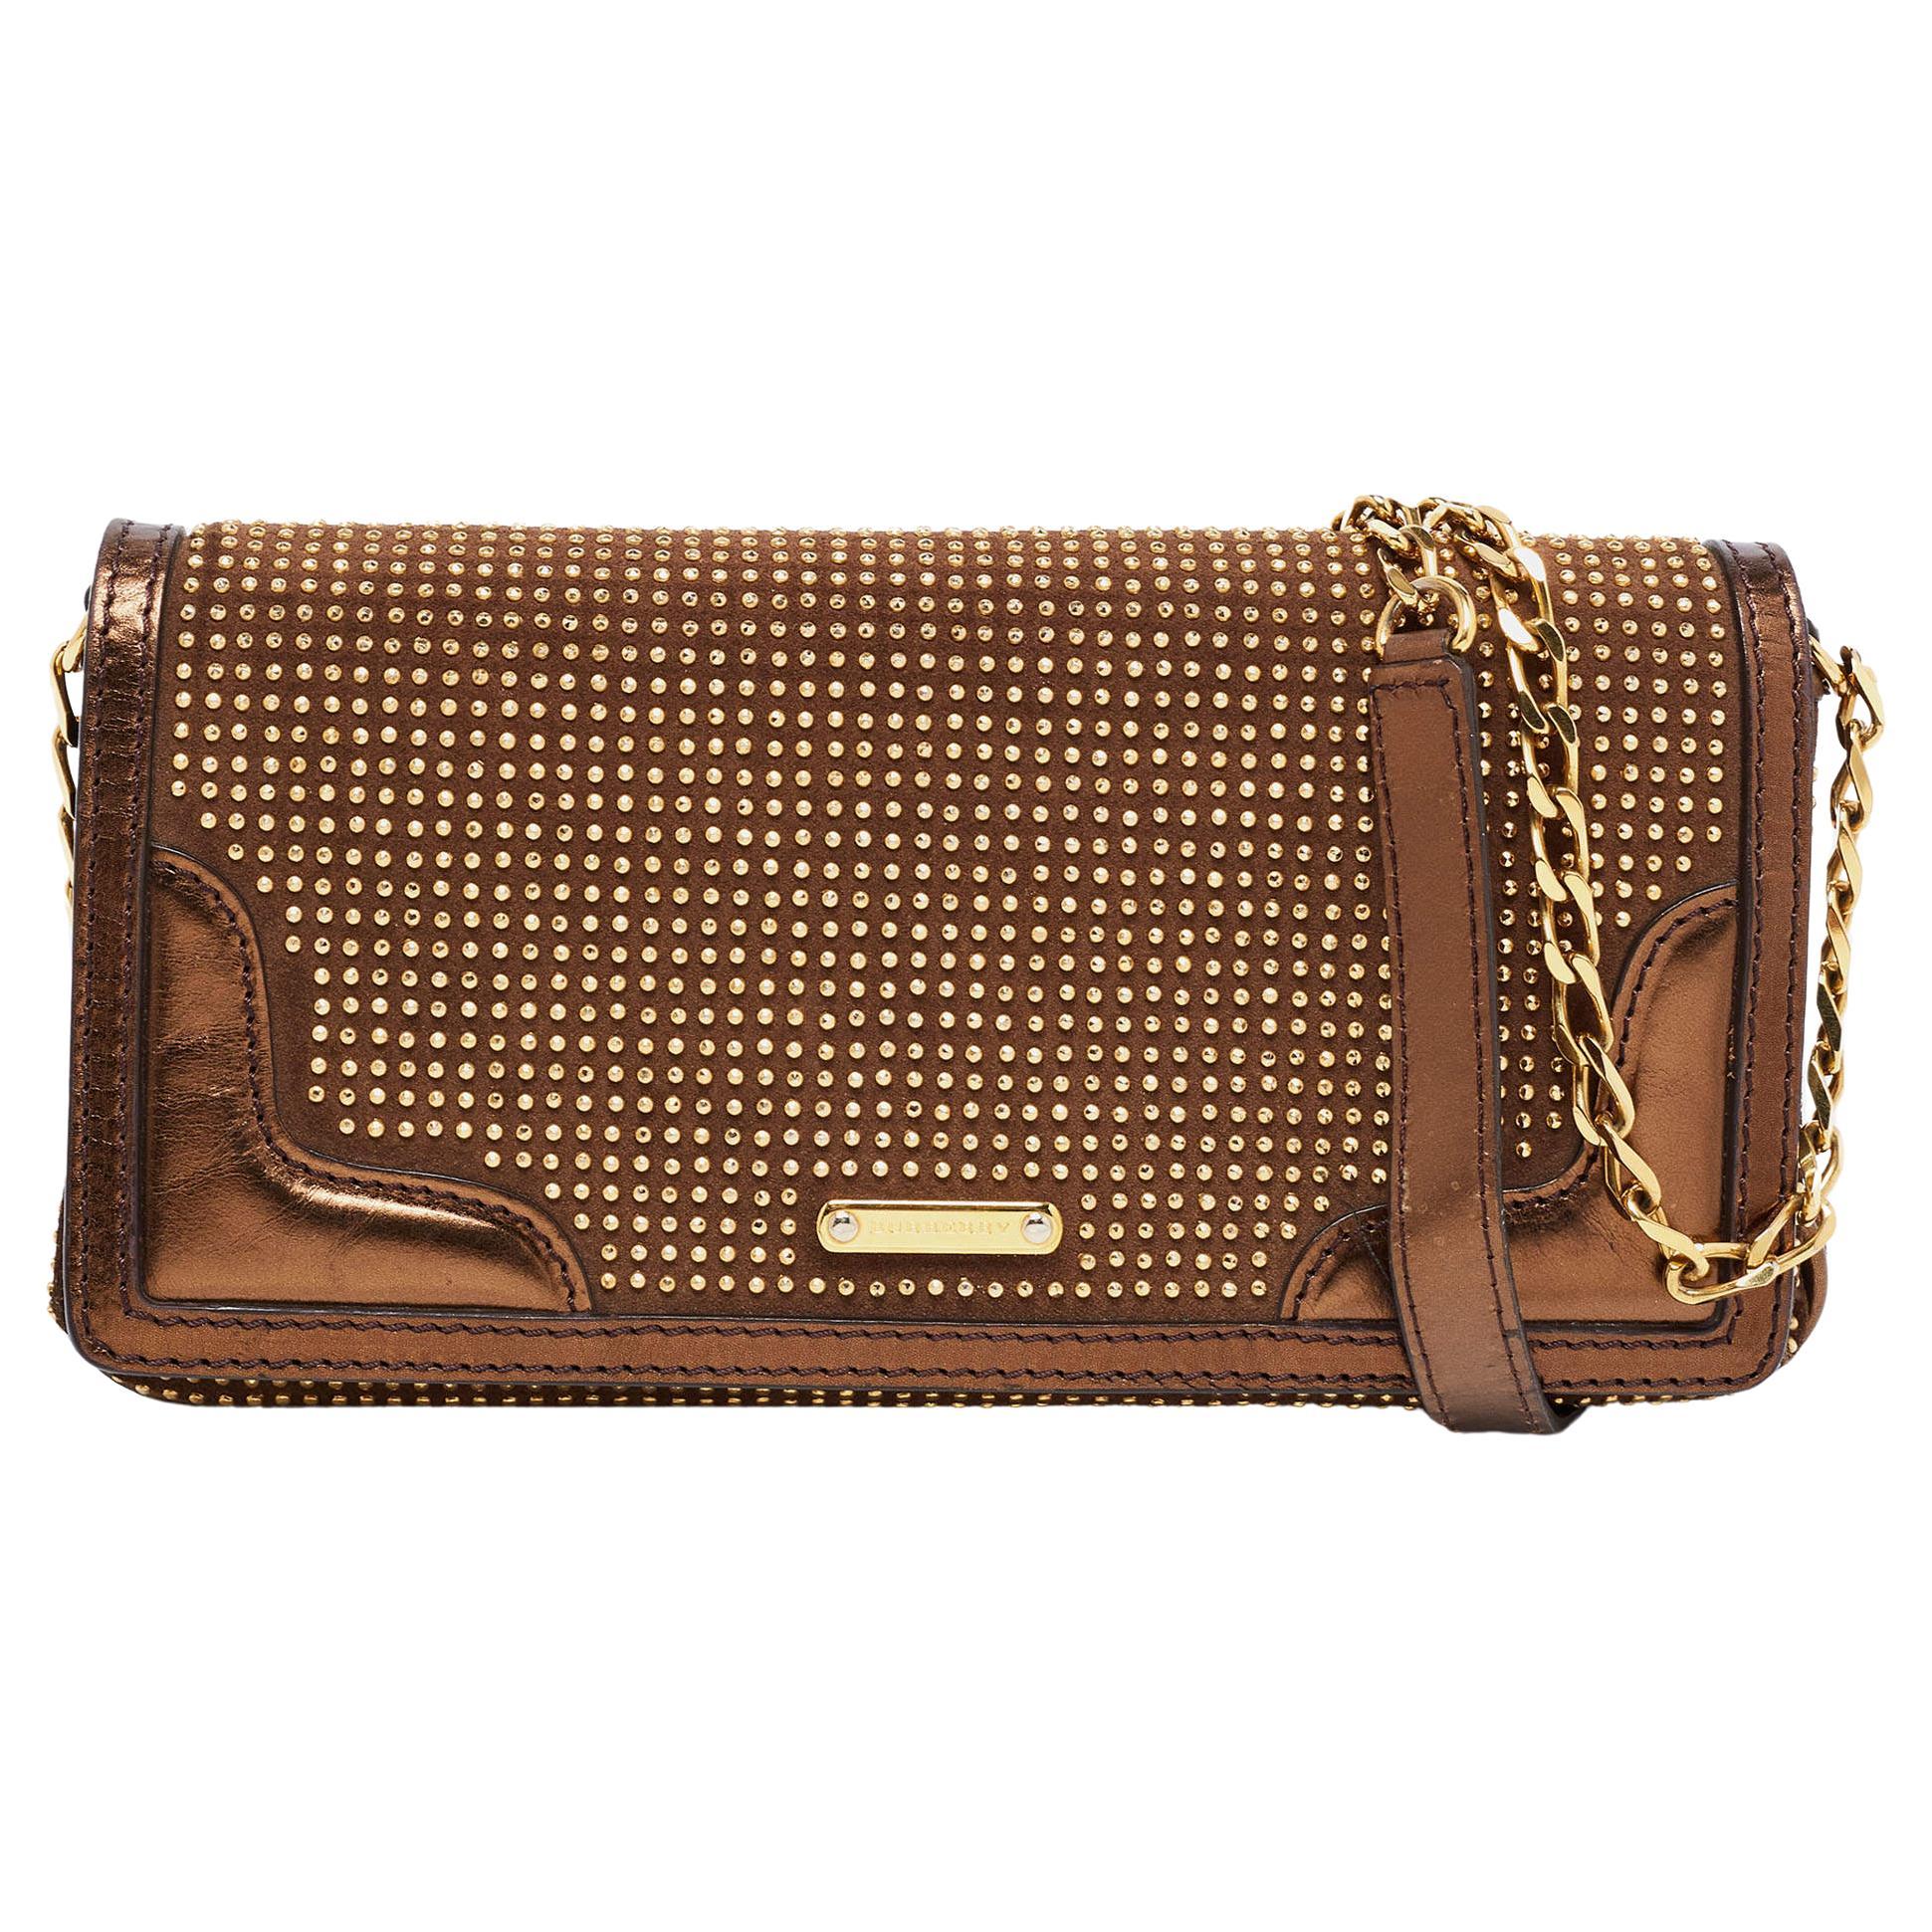 Burberry Brown/Metallic Bronze Studded Patent Leather and Suede Flap Shoulder Ba For Sale